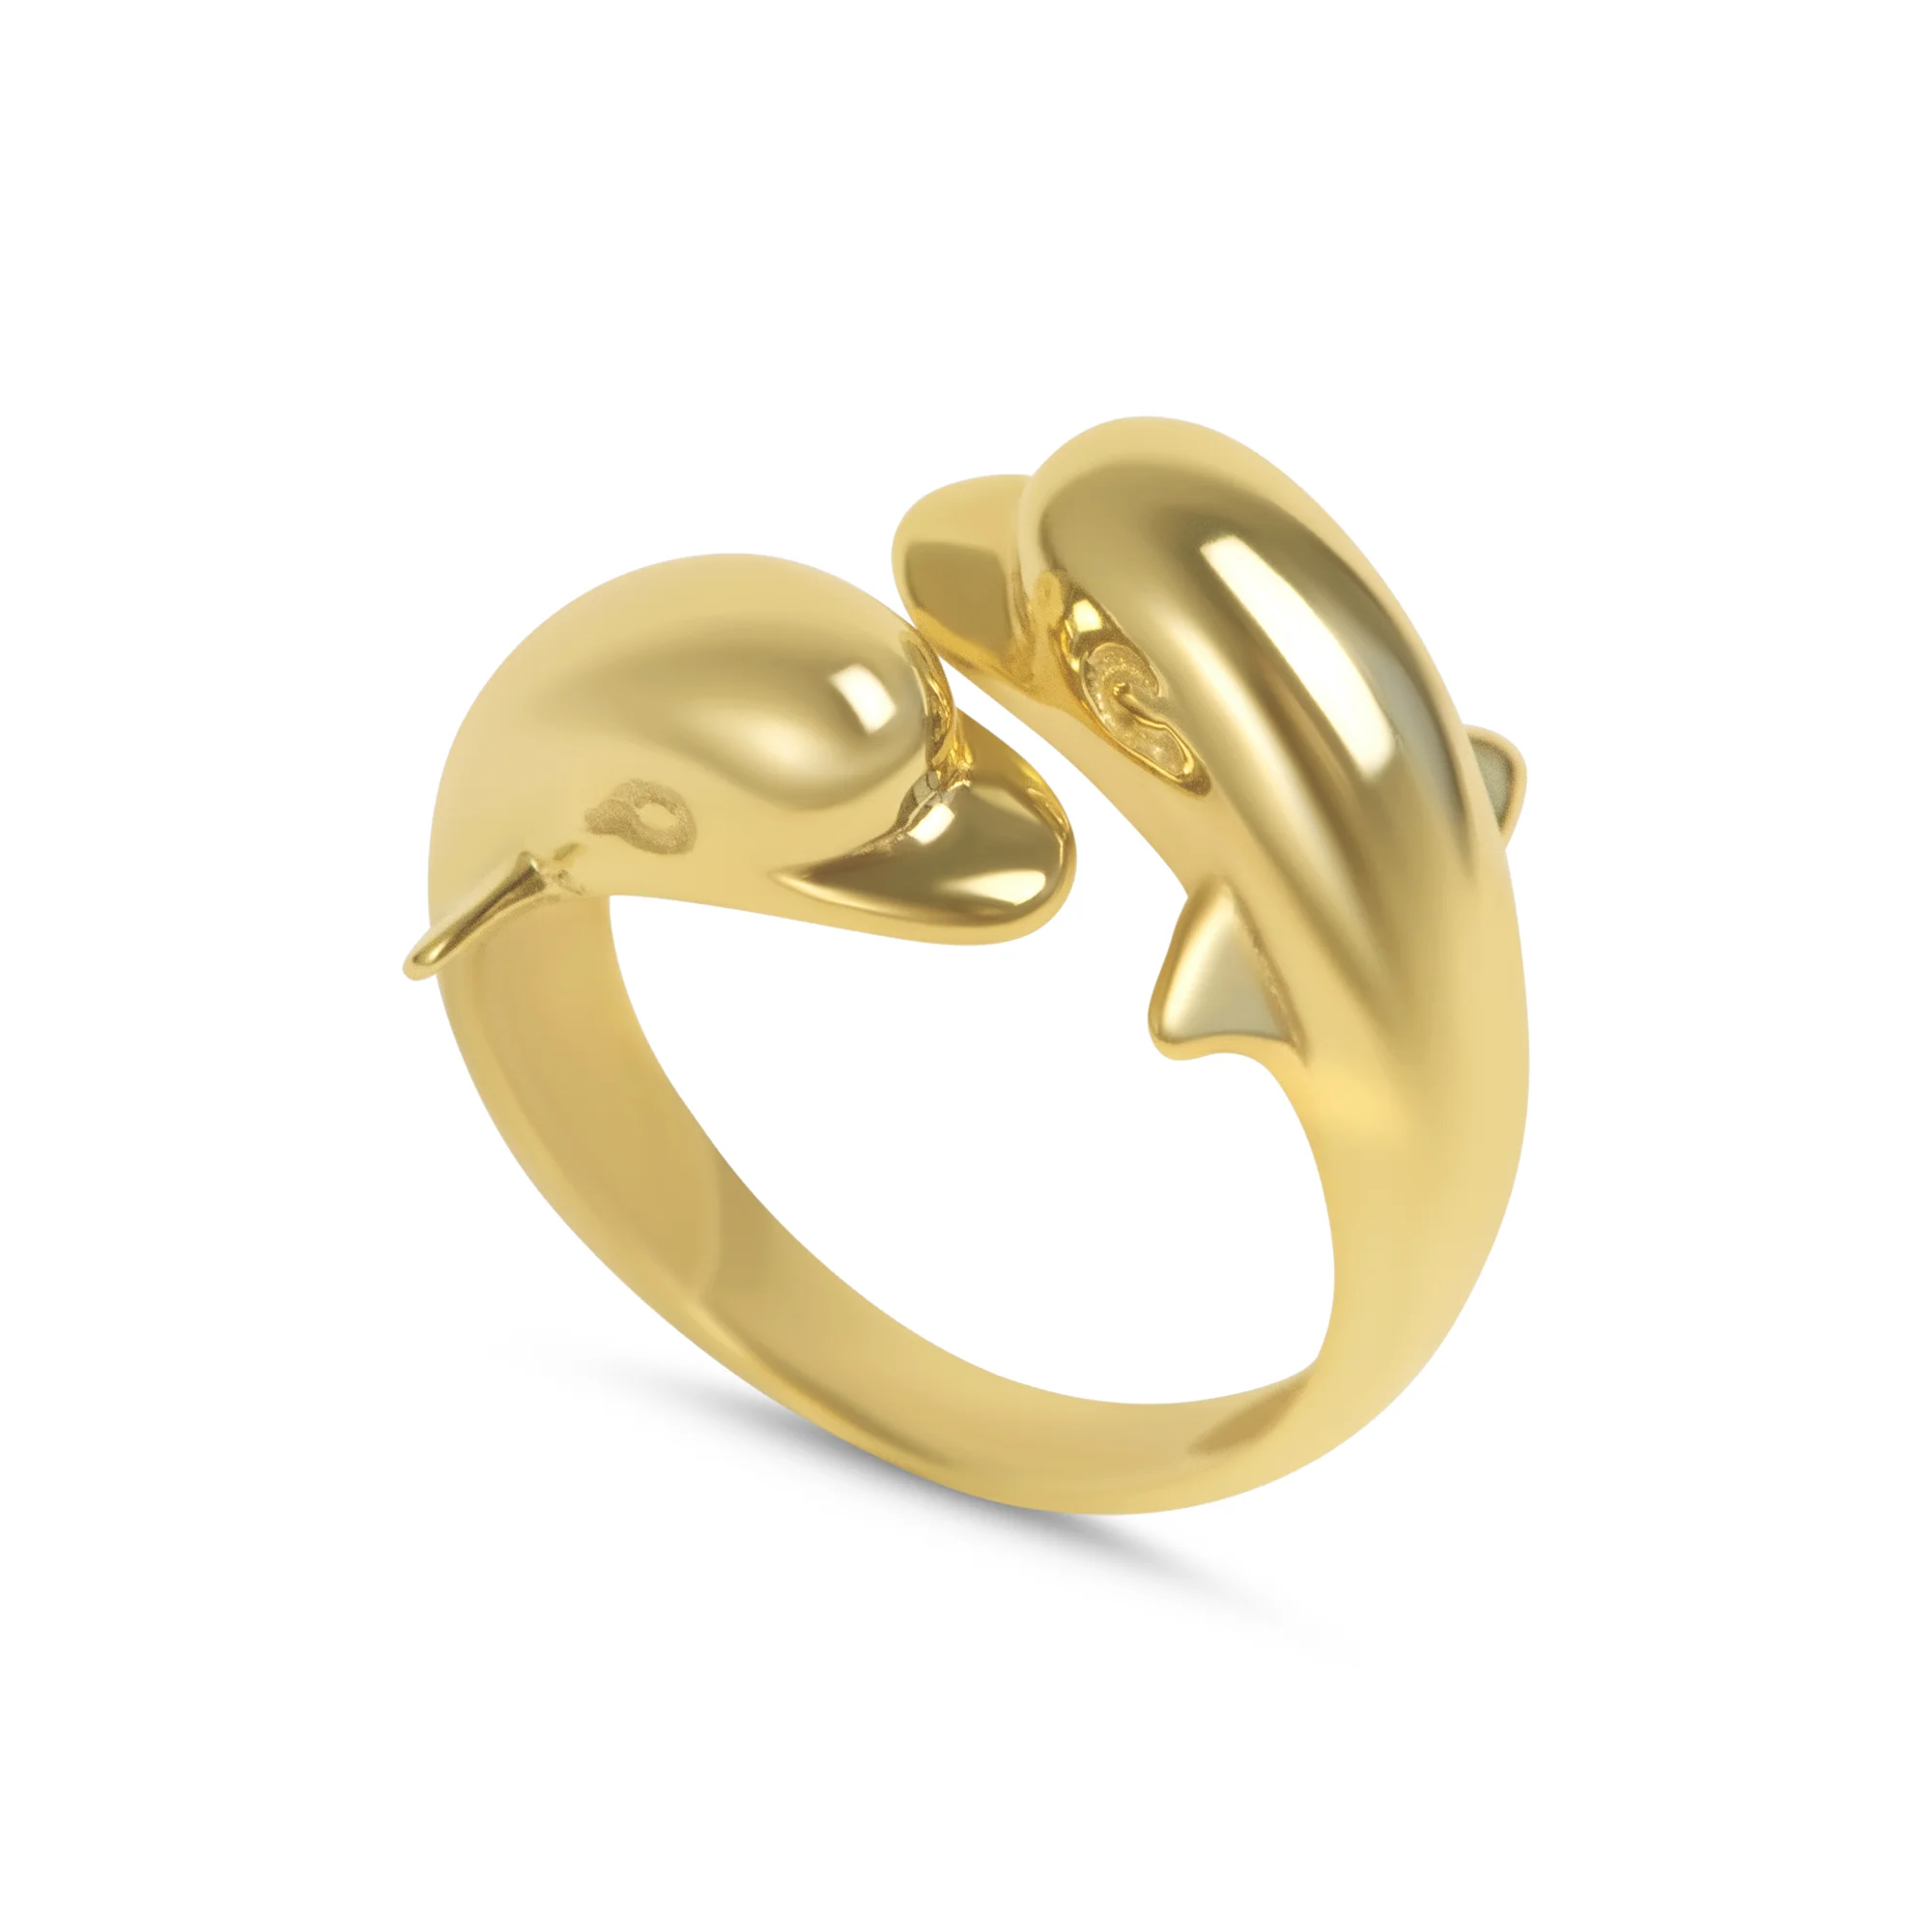 Two Headed Dolphin Ring #4